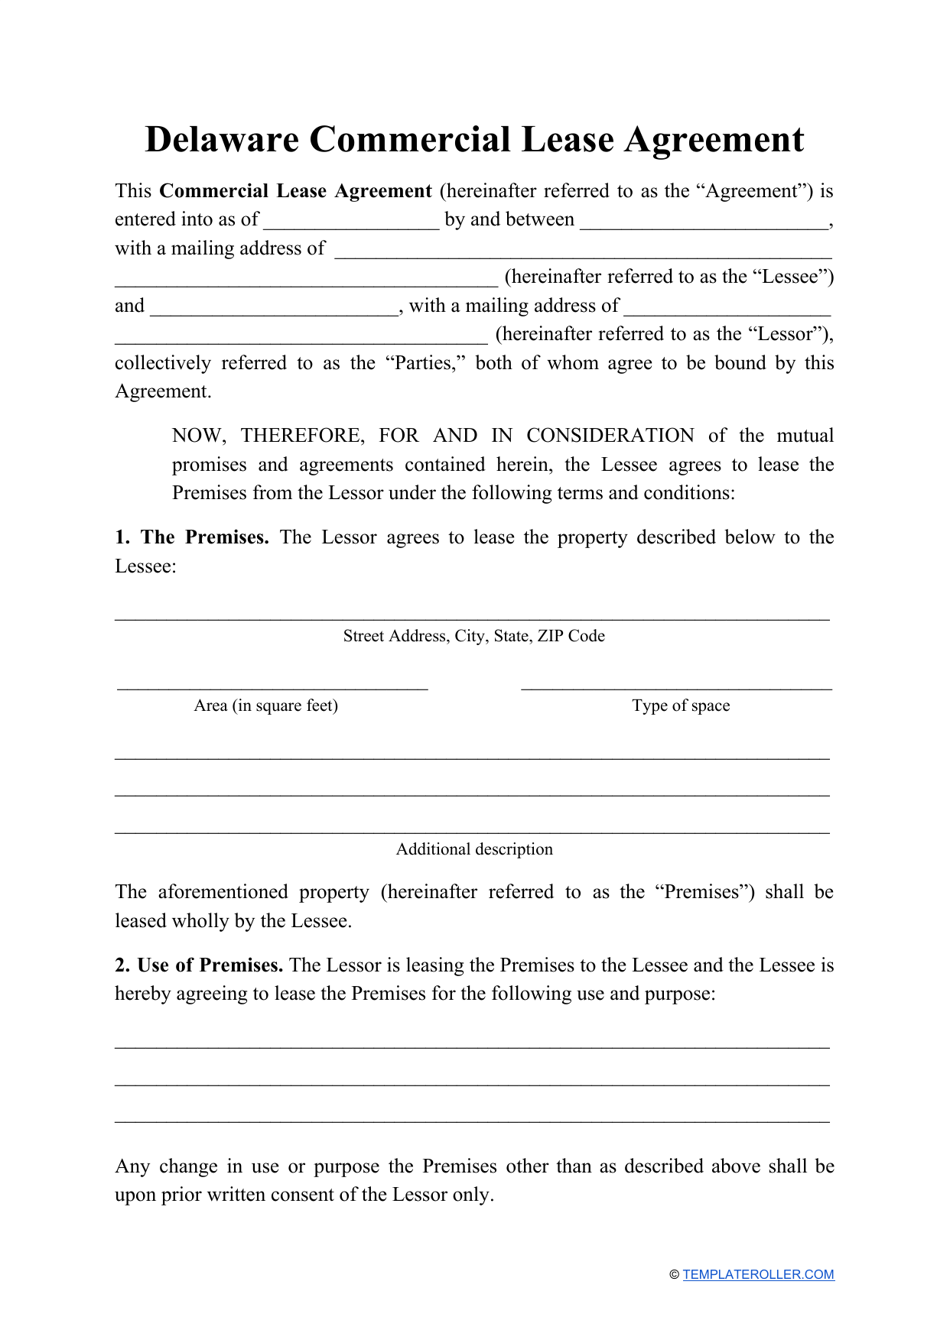 Commercial Lease Agreement Template - Delaware, Page 1